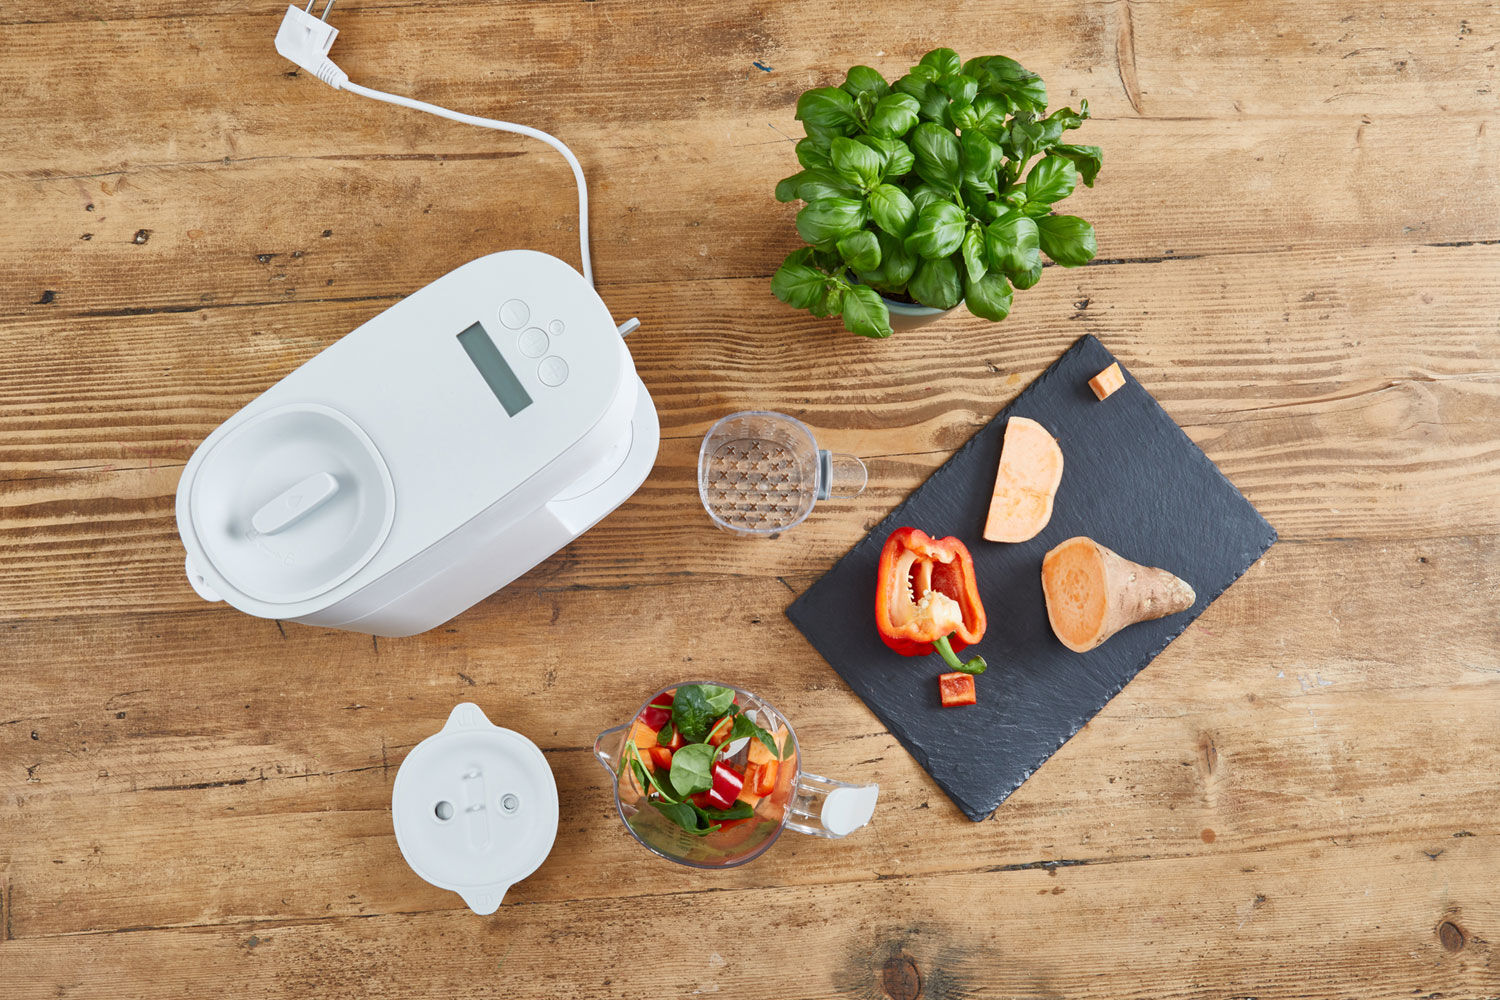 tommee tippee quick cook